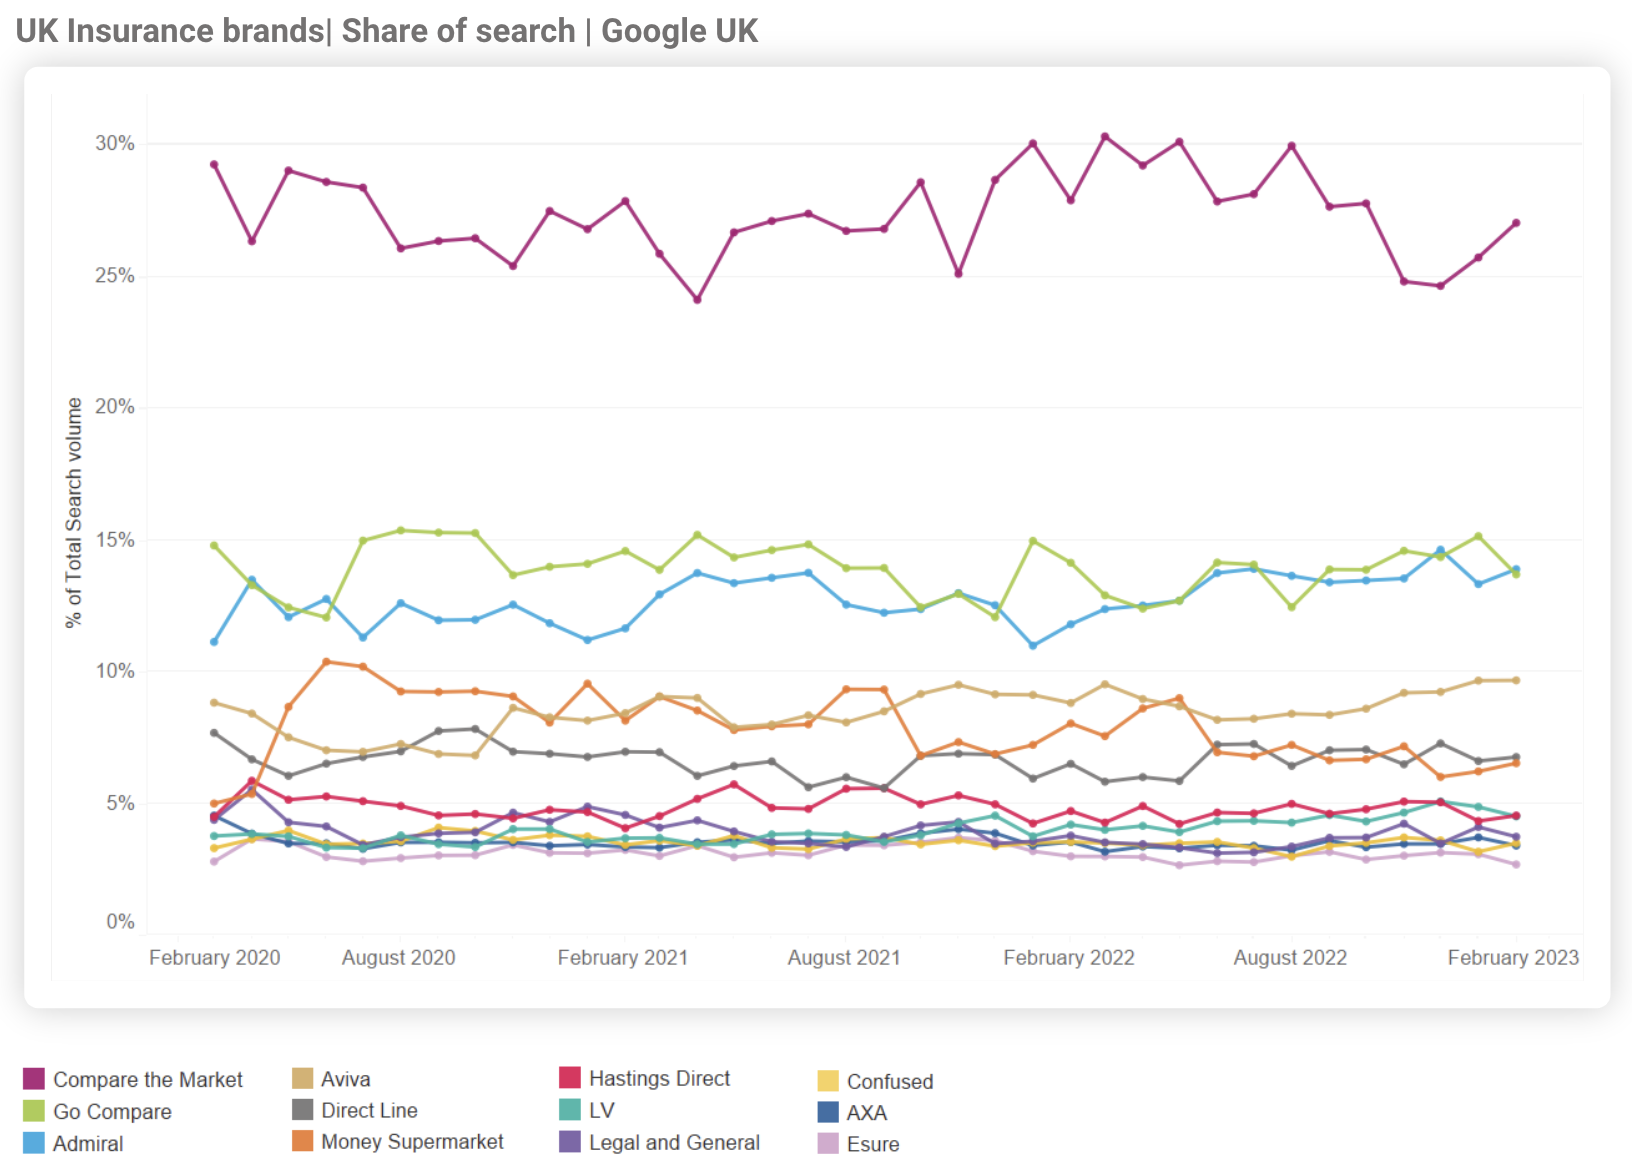 UK share of brand search timeline